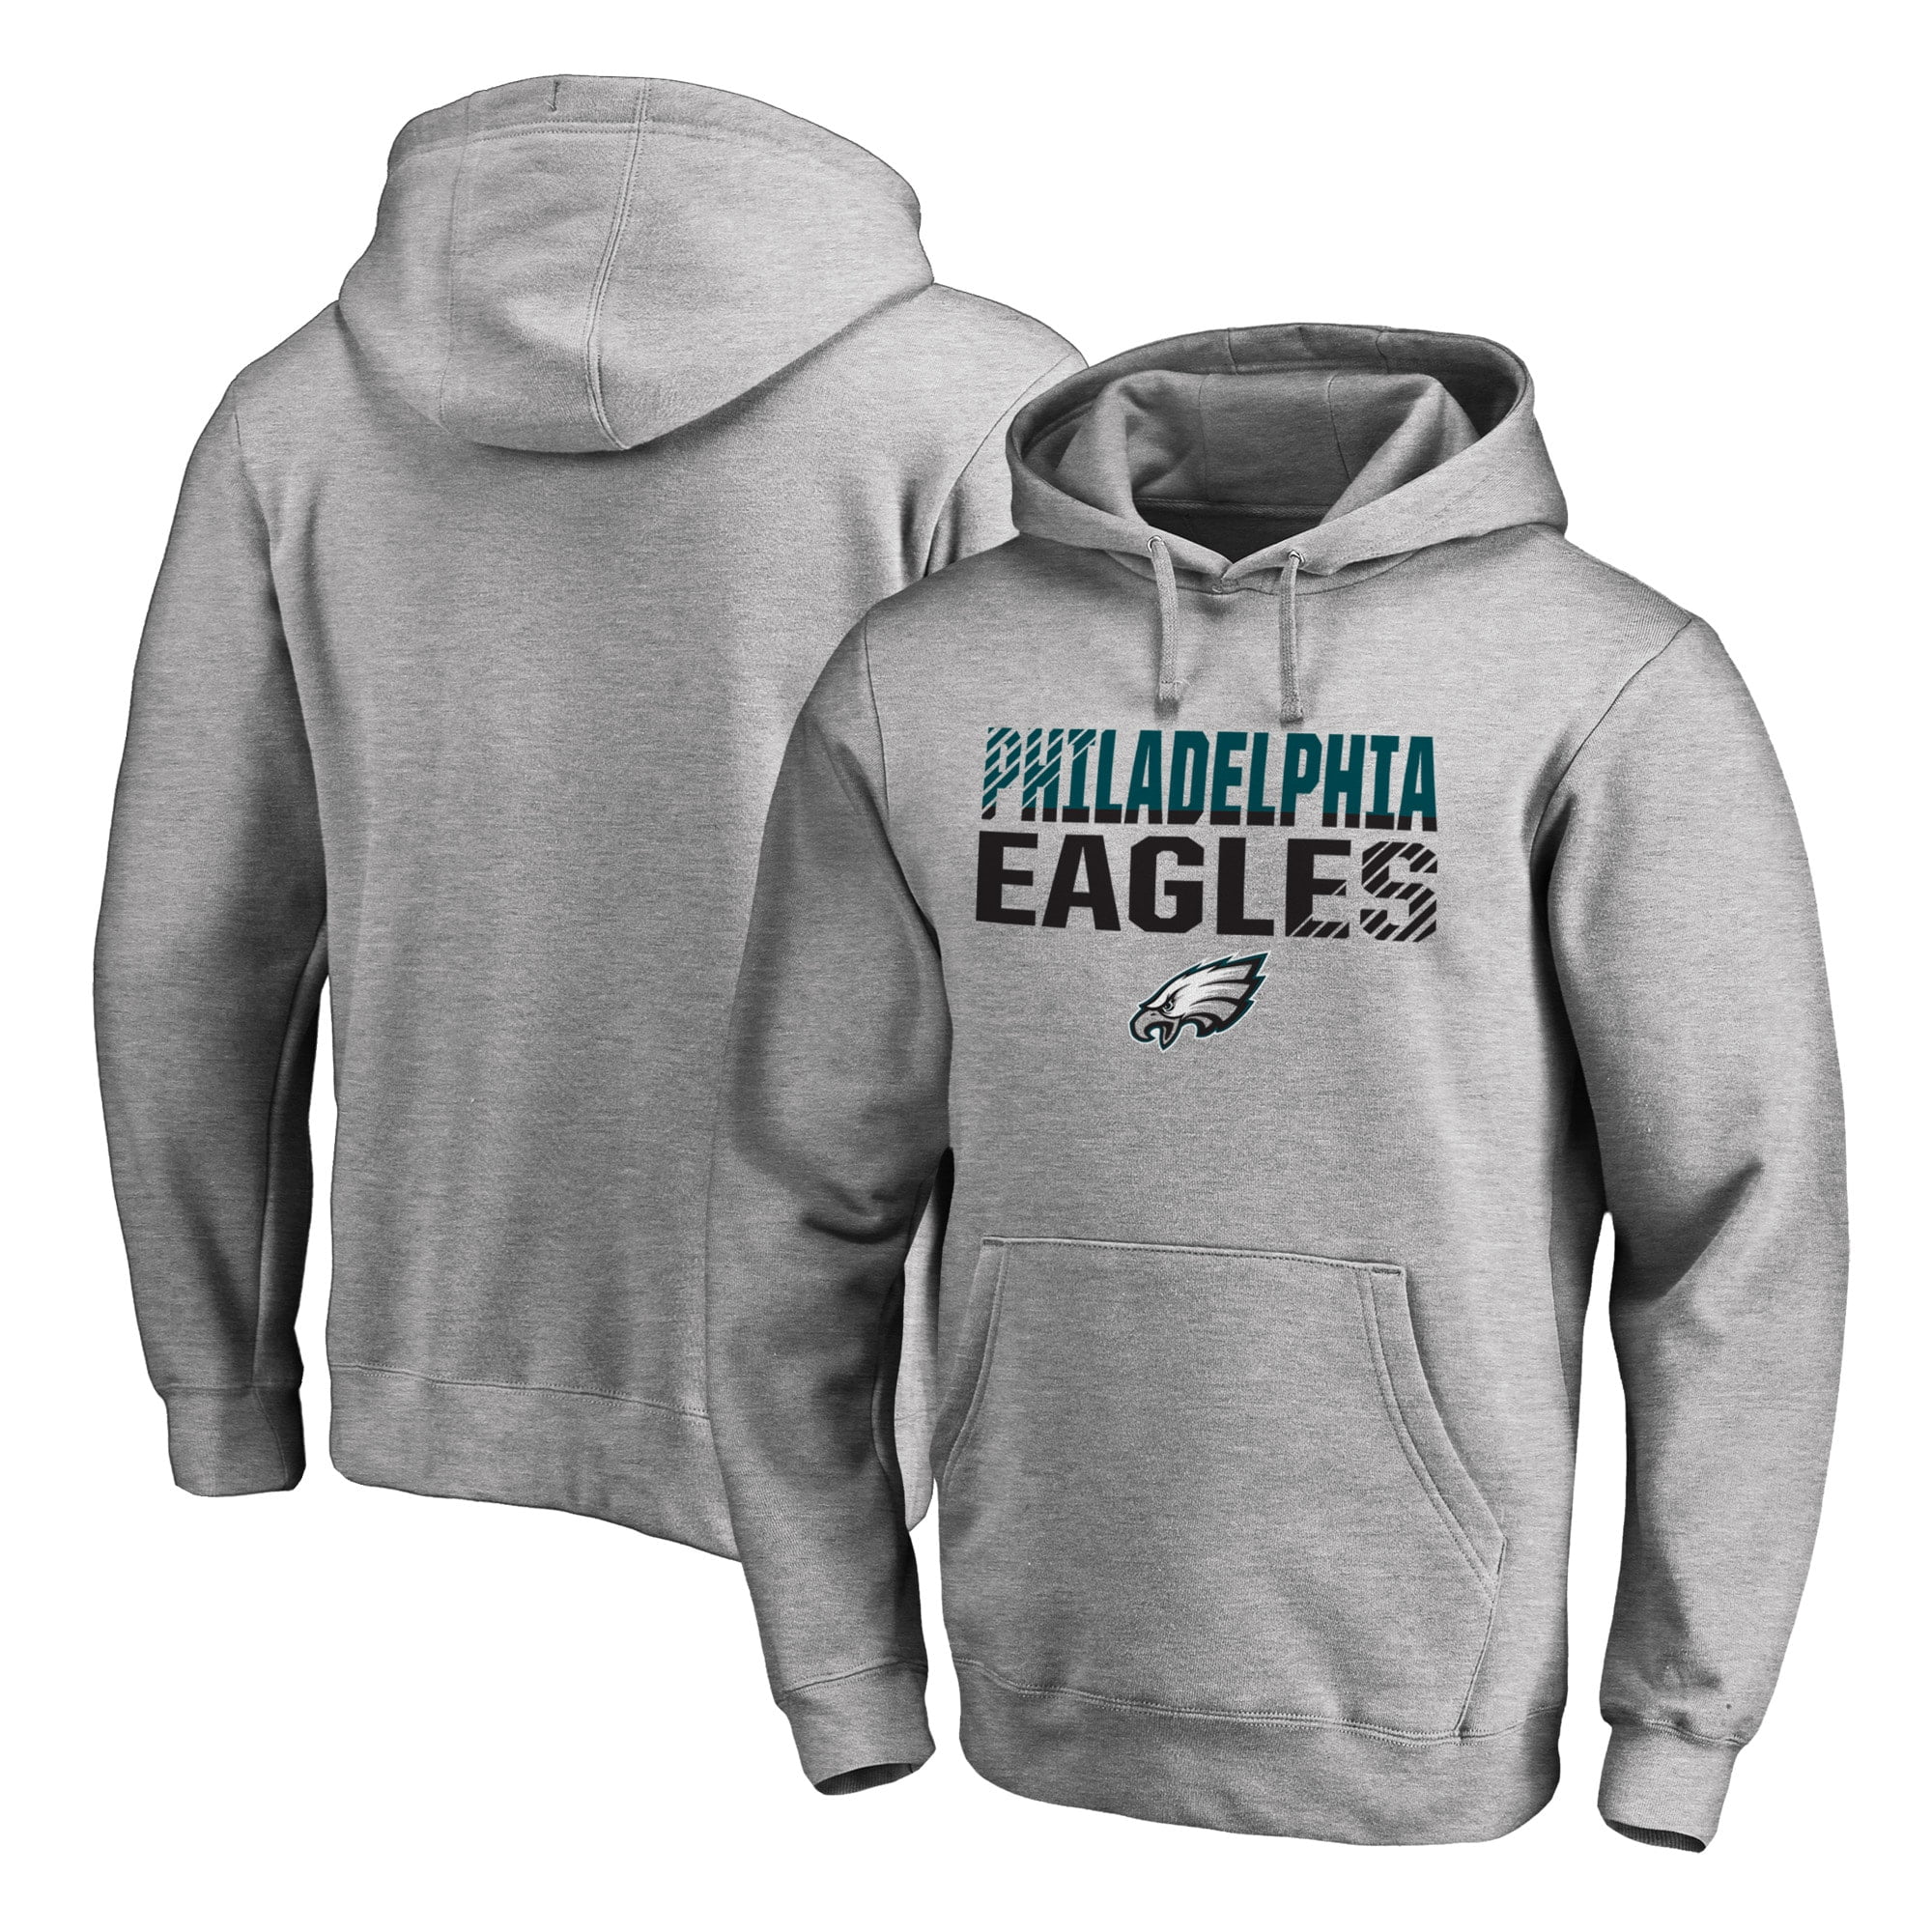 Color : Black, Size : S Mens Casual Sweatshirt For Philadelphia Eagles American Football Hoodie Fans Jerseys Sports And Recreation Pullover Black 